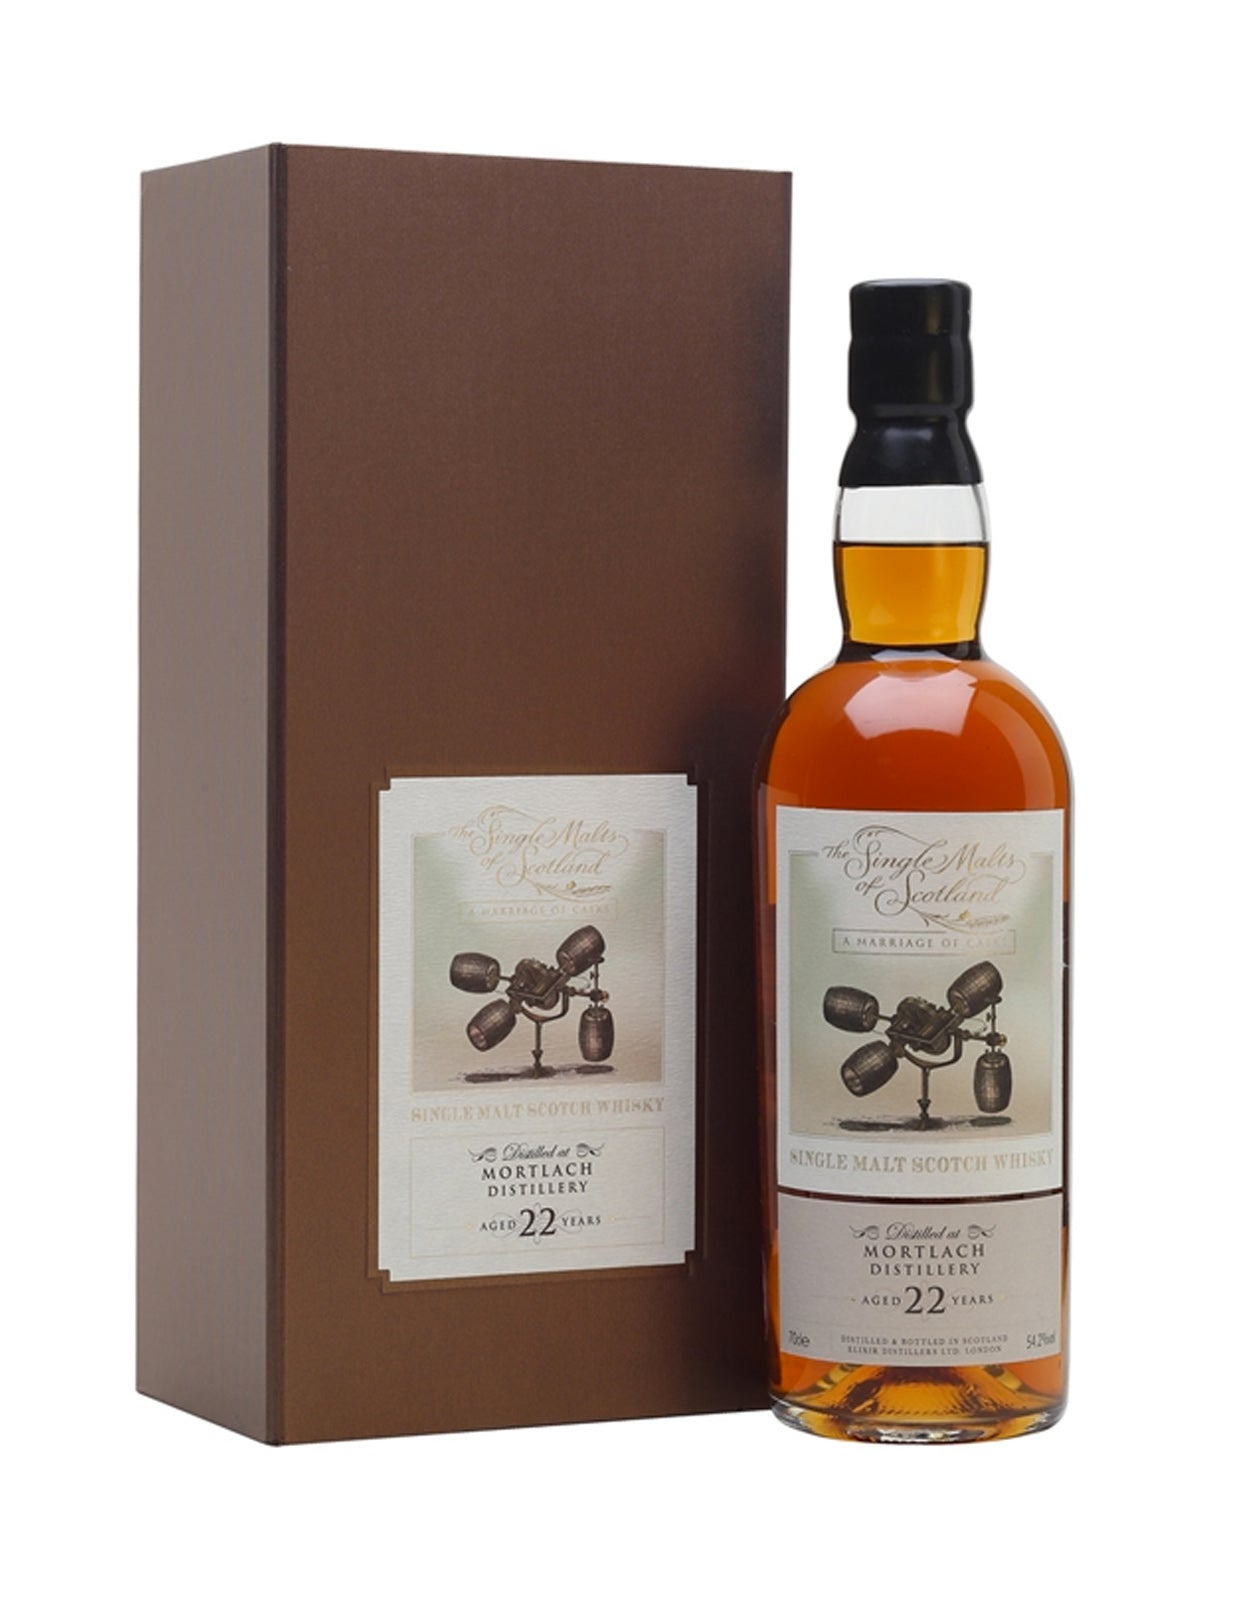 The Single Malts of Scotland Mortlach 22 Year Old